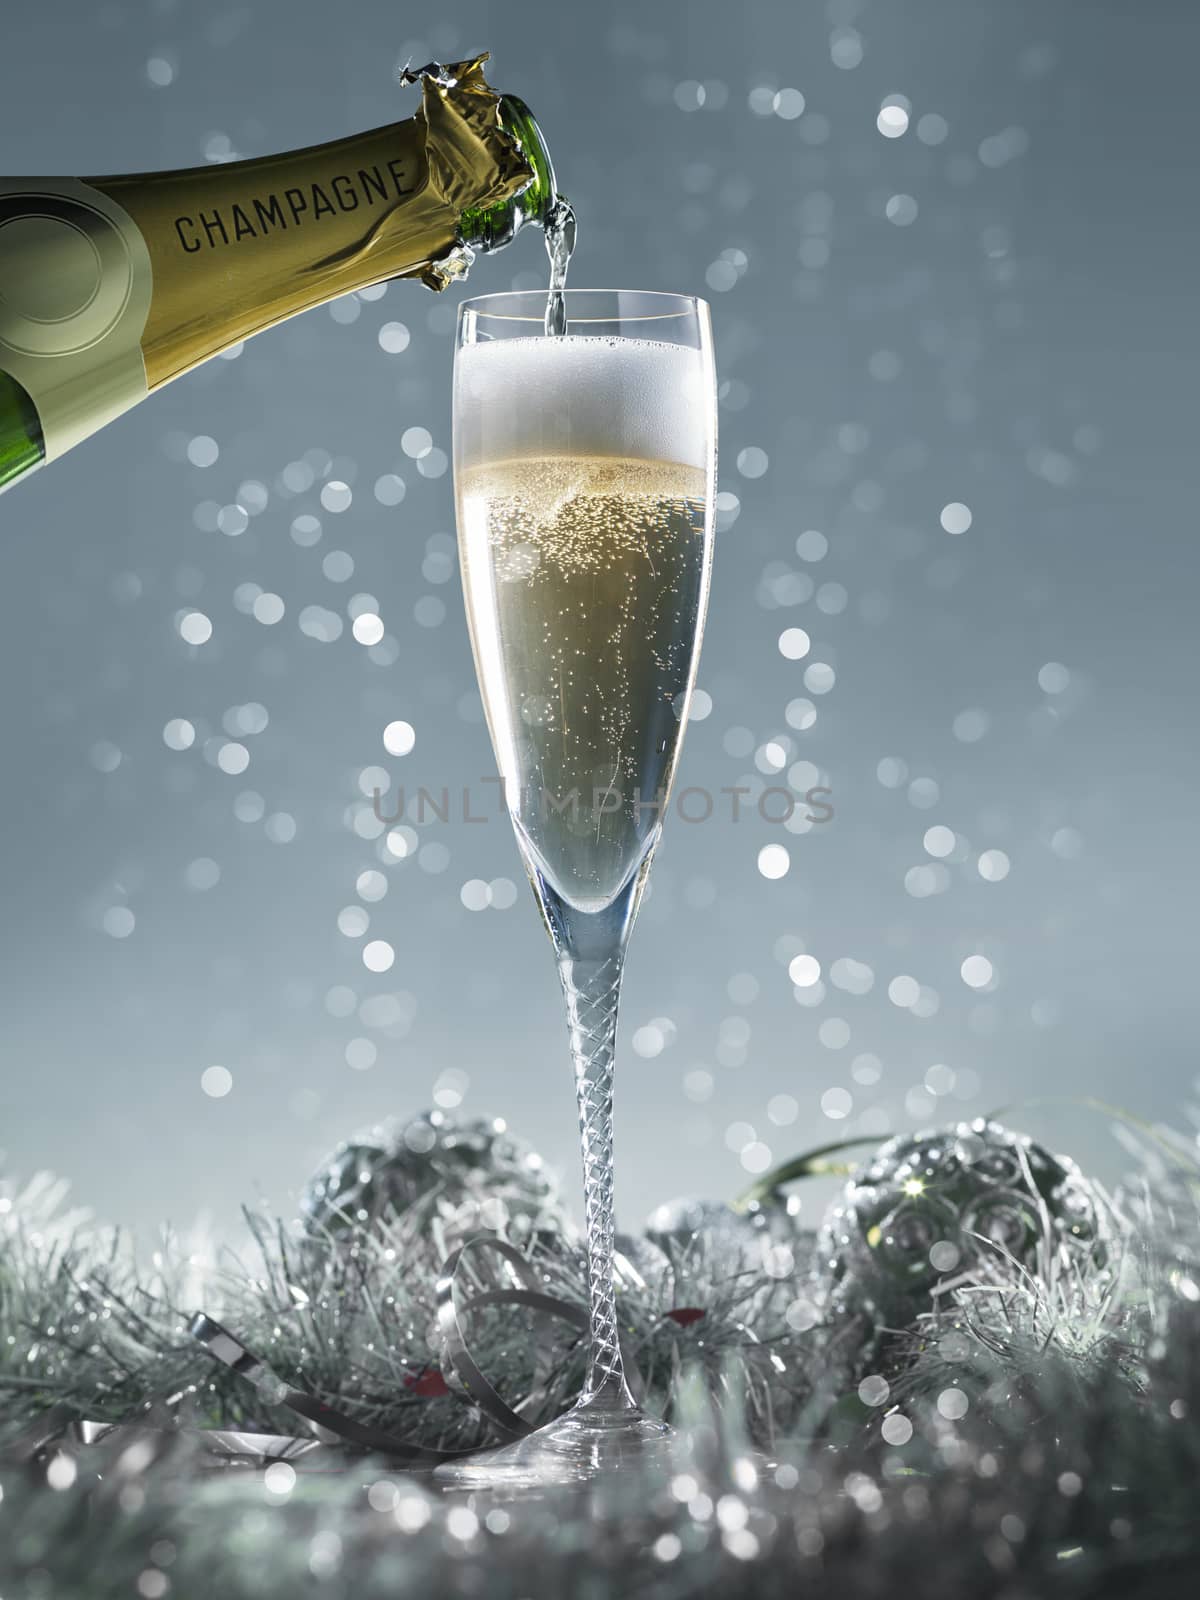 pouring champagne into the glass on a blue christmas background by janssenkruseproductions